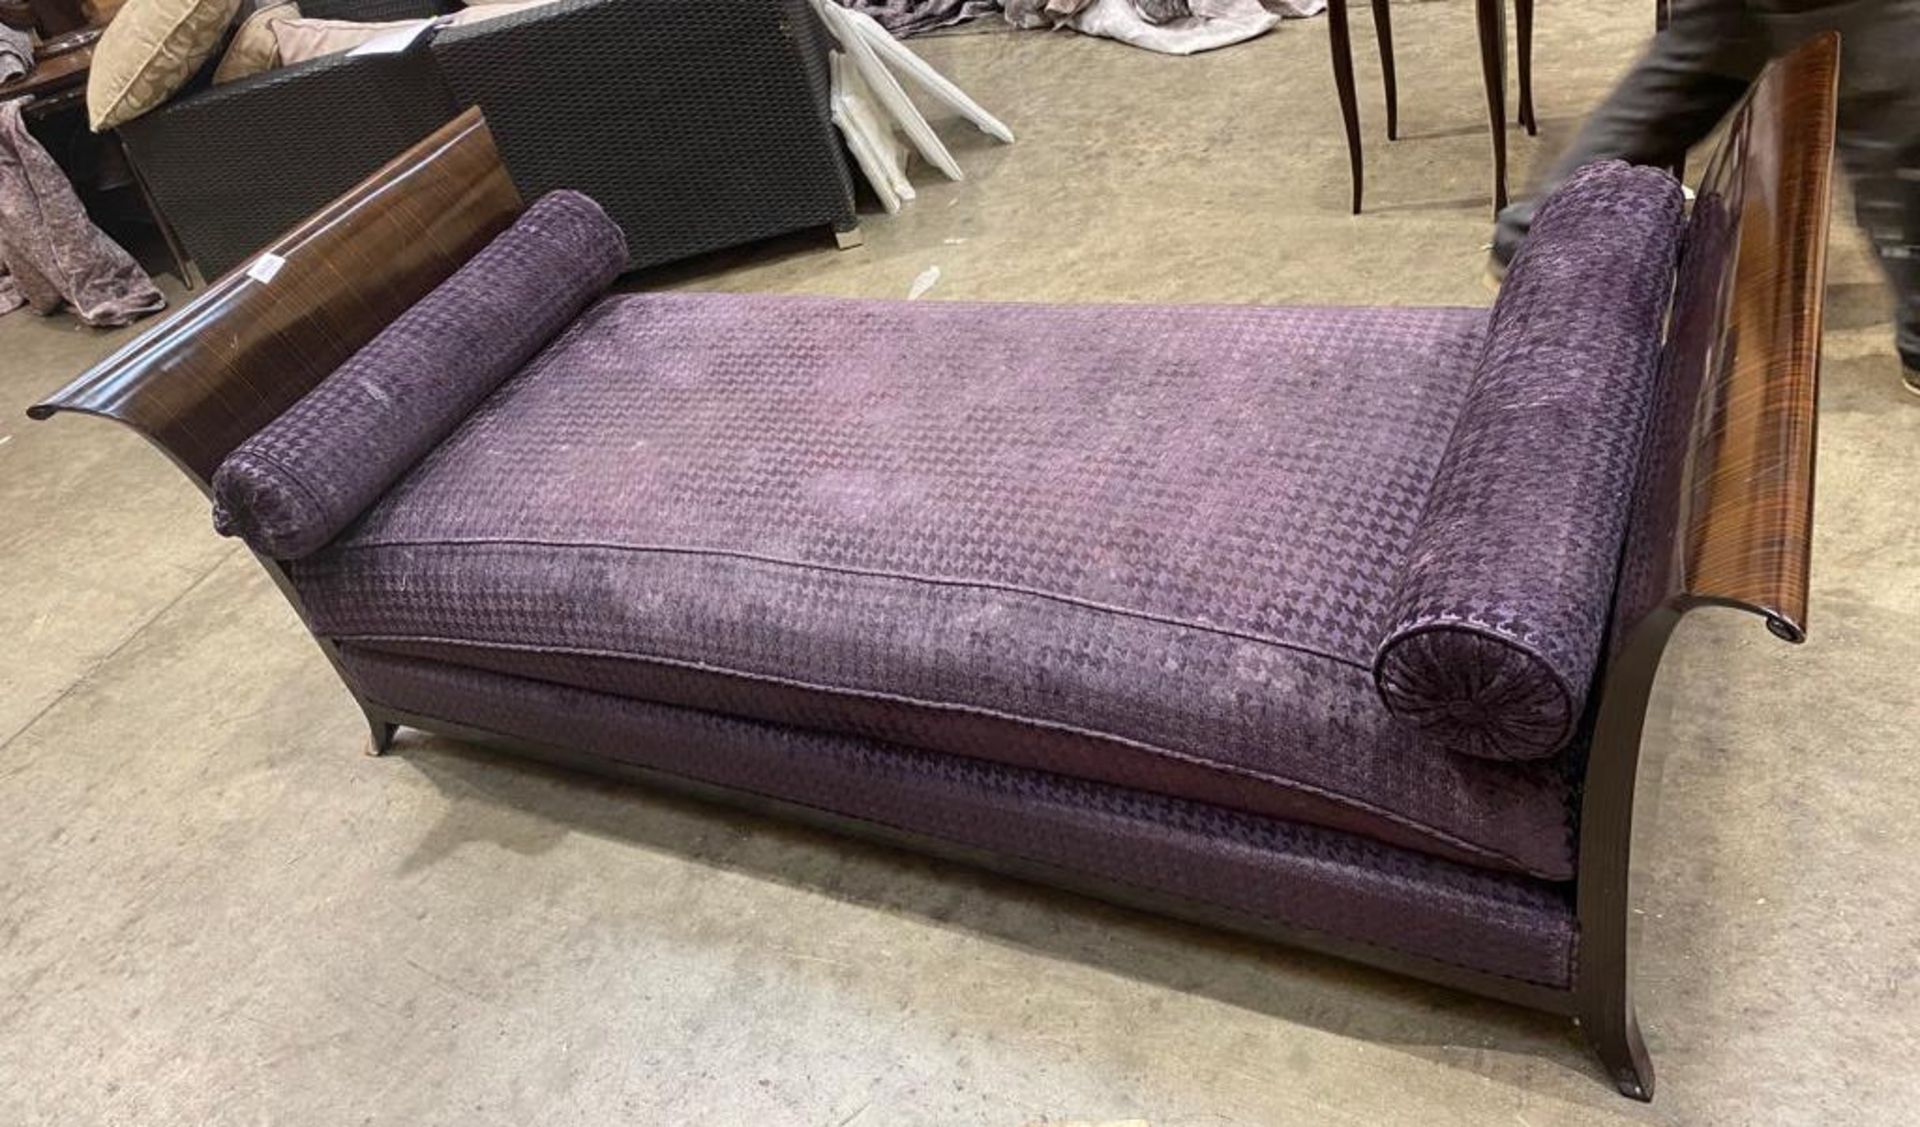 1 x Chaise Longue Featuring Ebony Wood Finish, Scroll Ends and Purple Fabric Cushions - Image 3 of 4